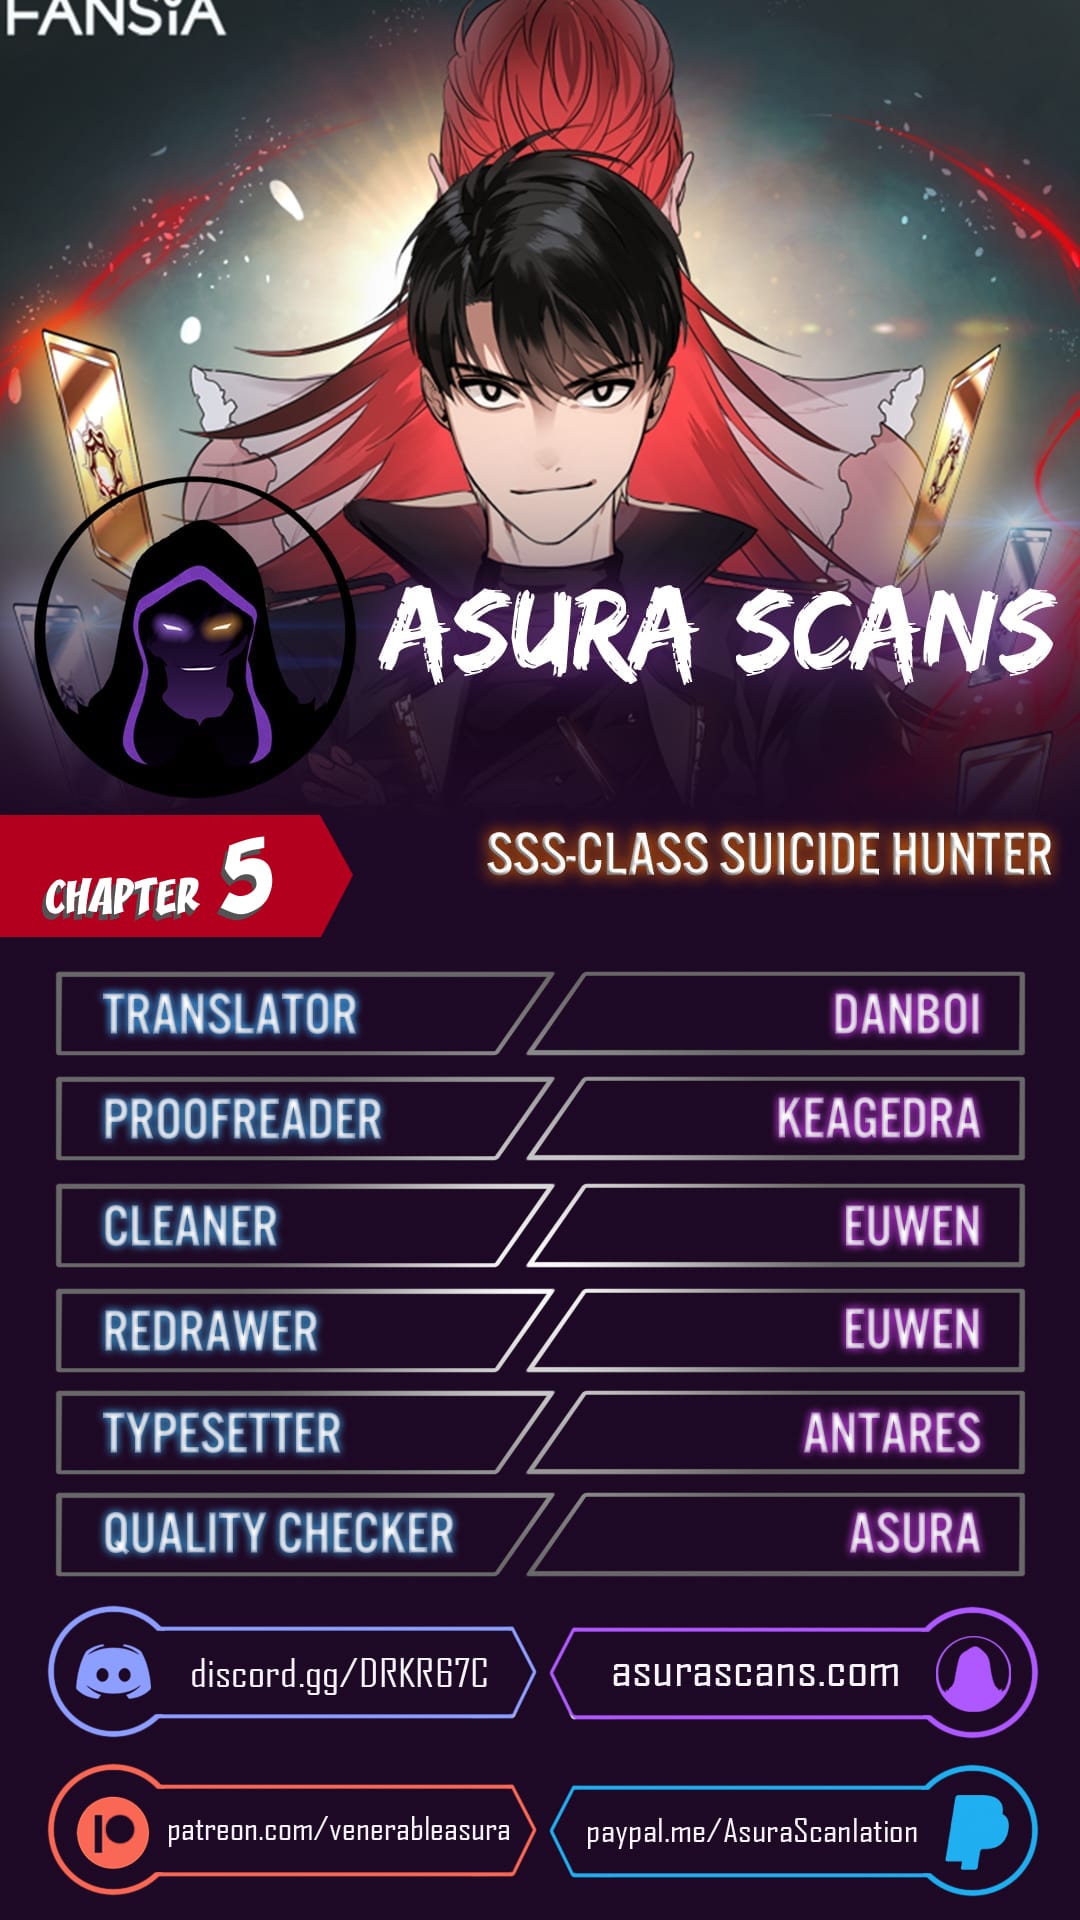 SSS-Class Suicide Hunter chapter 5